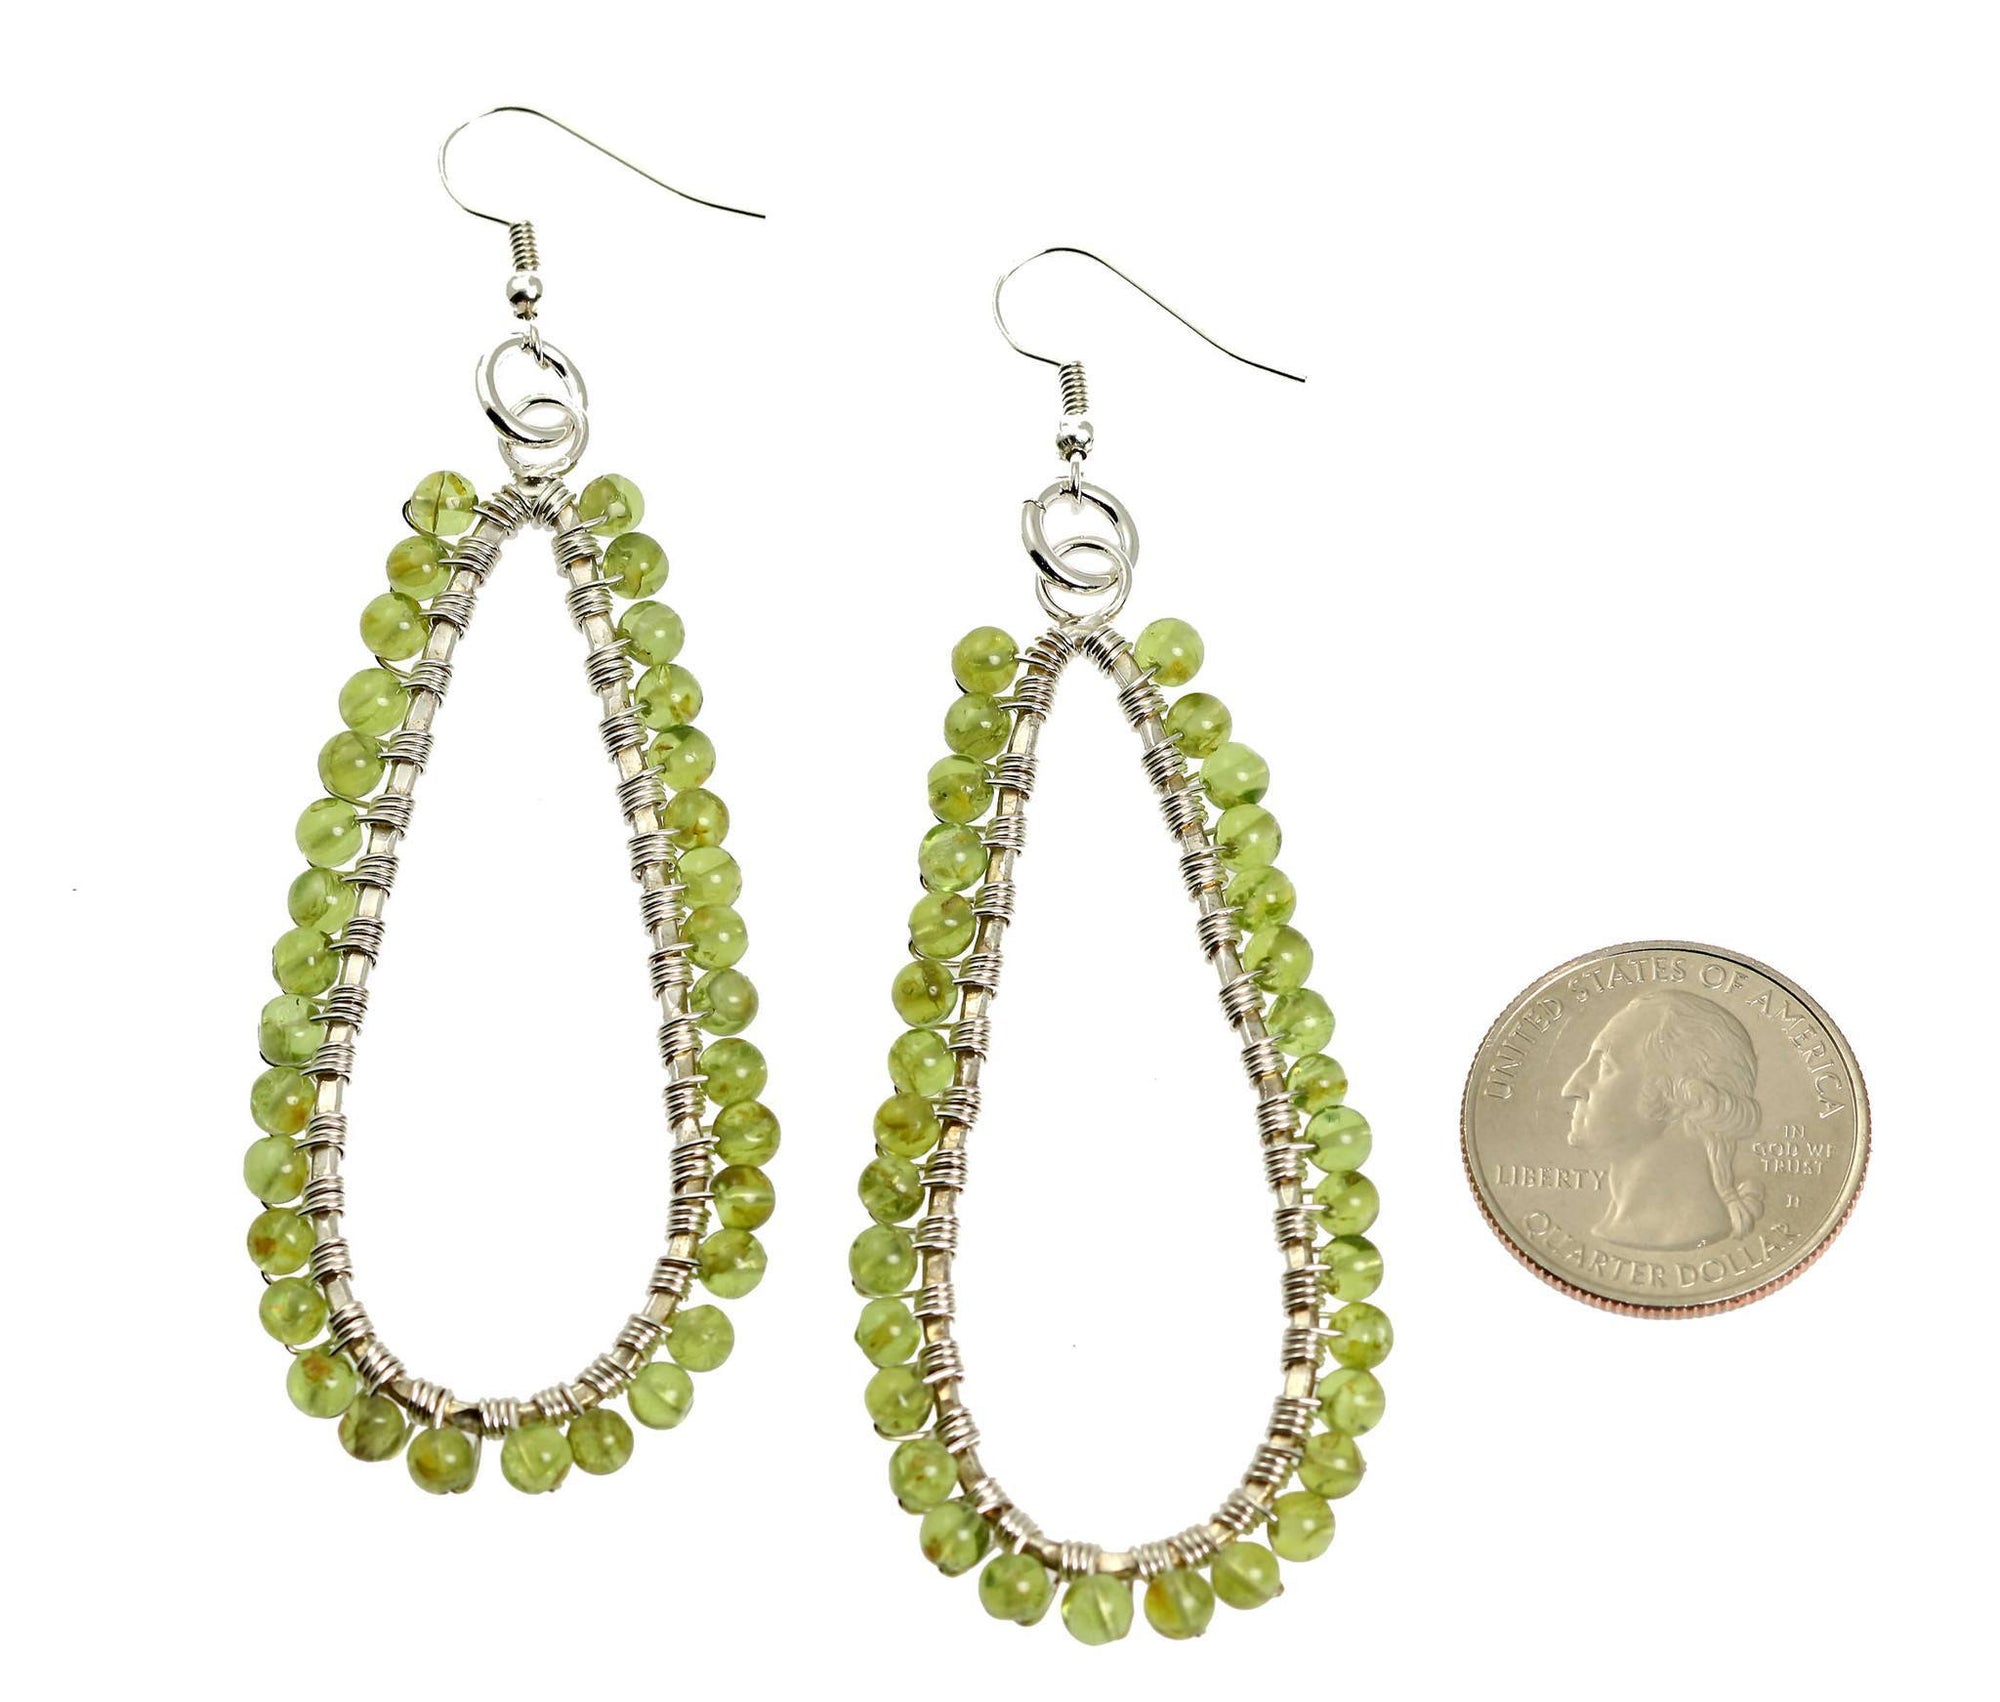 Size of Hammered Silver Teardrop Earrings with Peridot